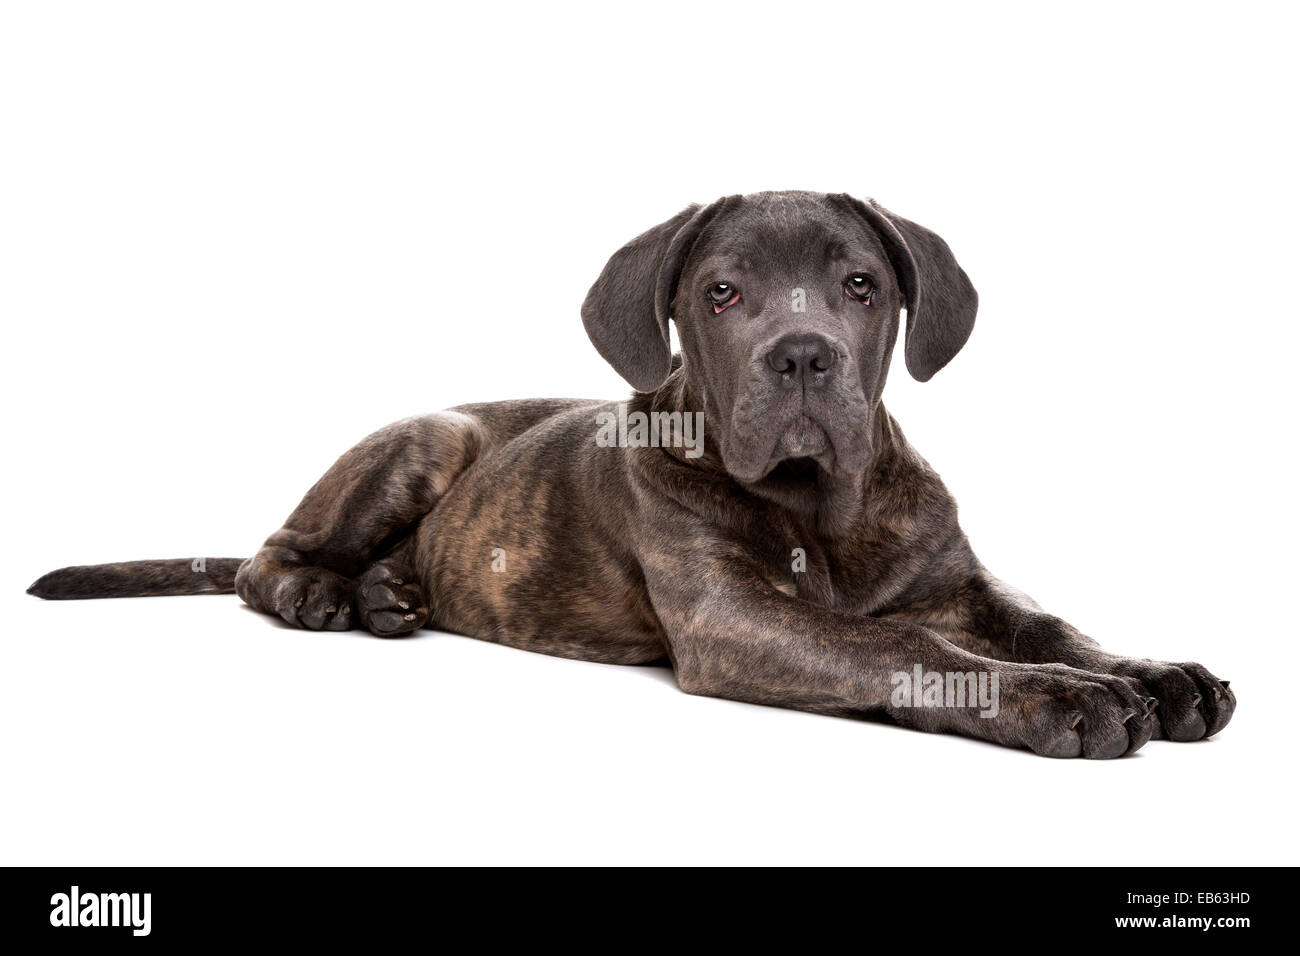 grey cane corso puppy dog in front of a white background Stock Photo